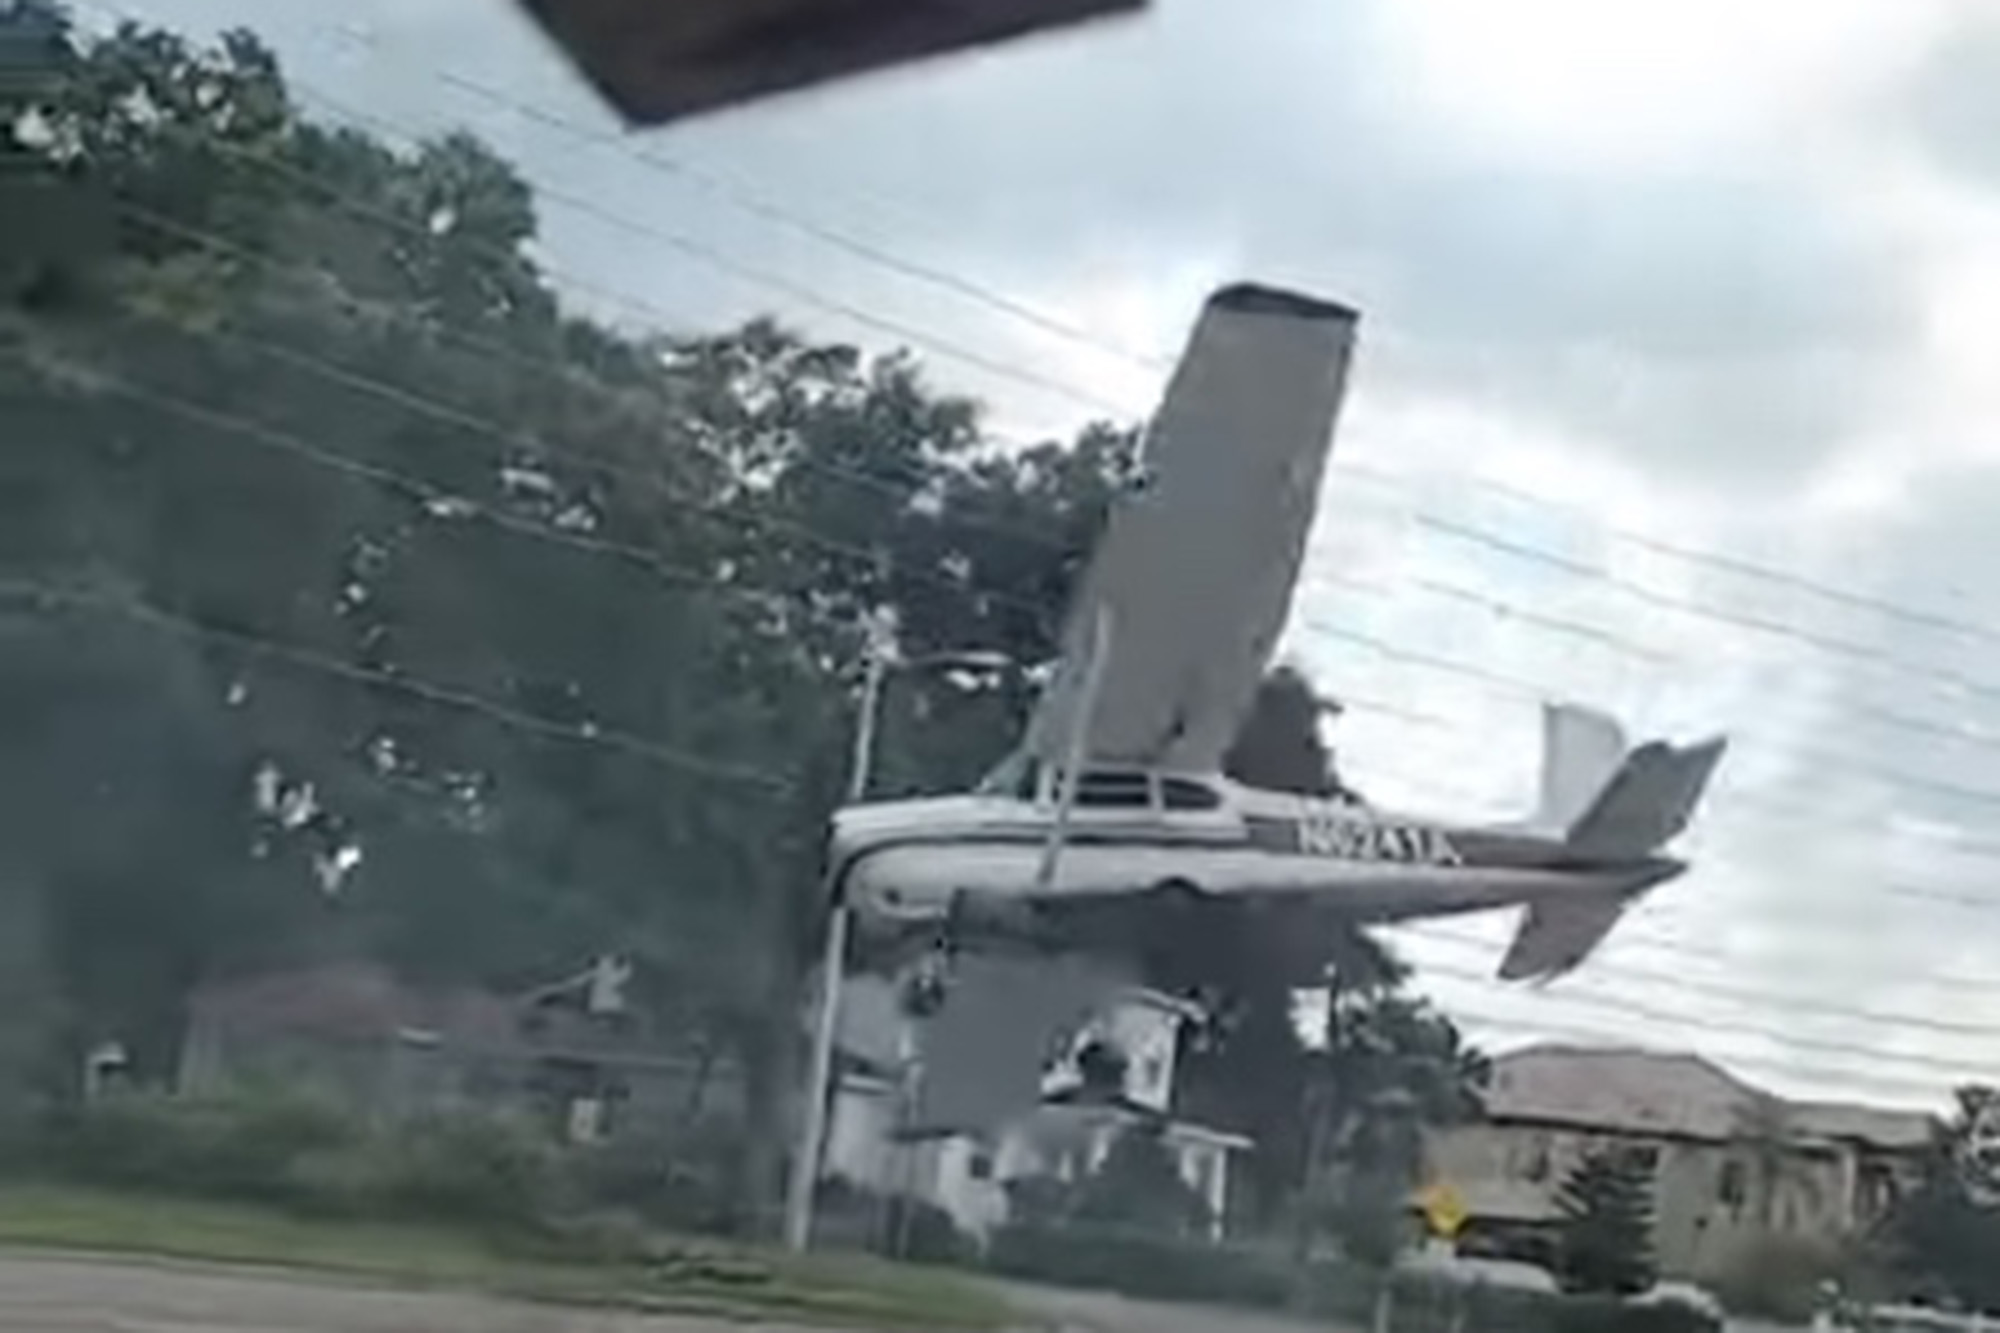 A small plane crash-landed onto a busy street in Florida Friday.